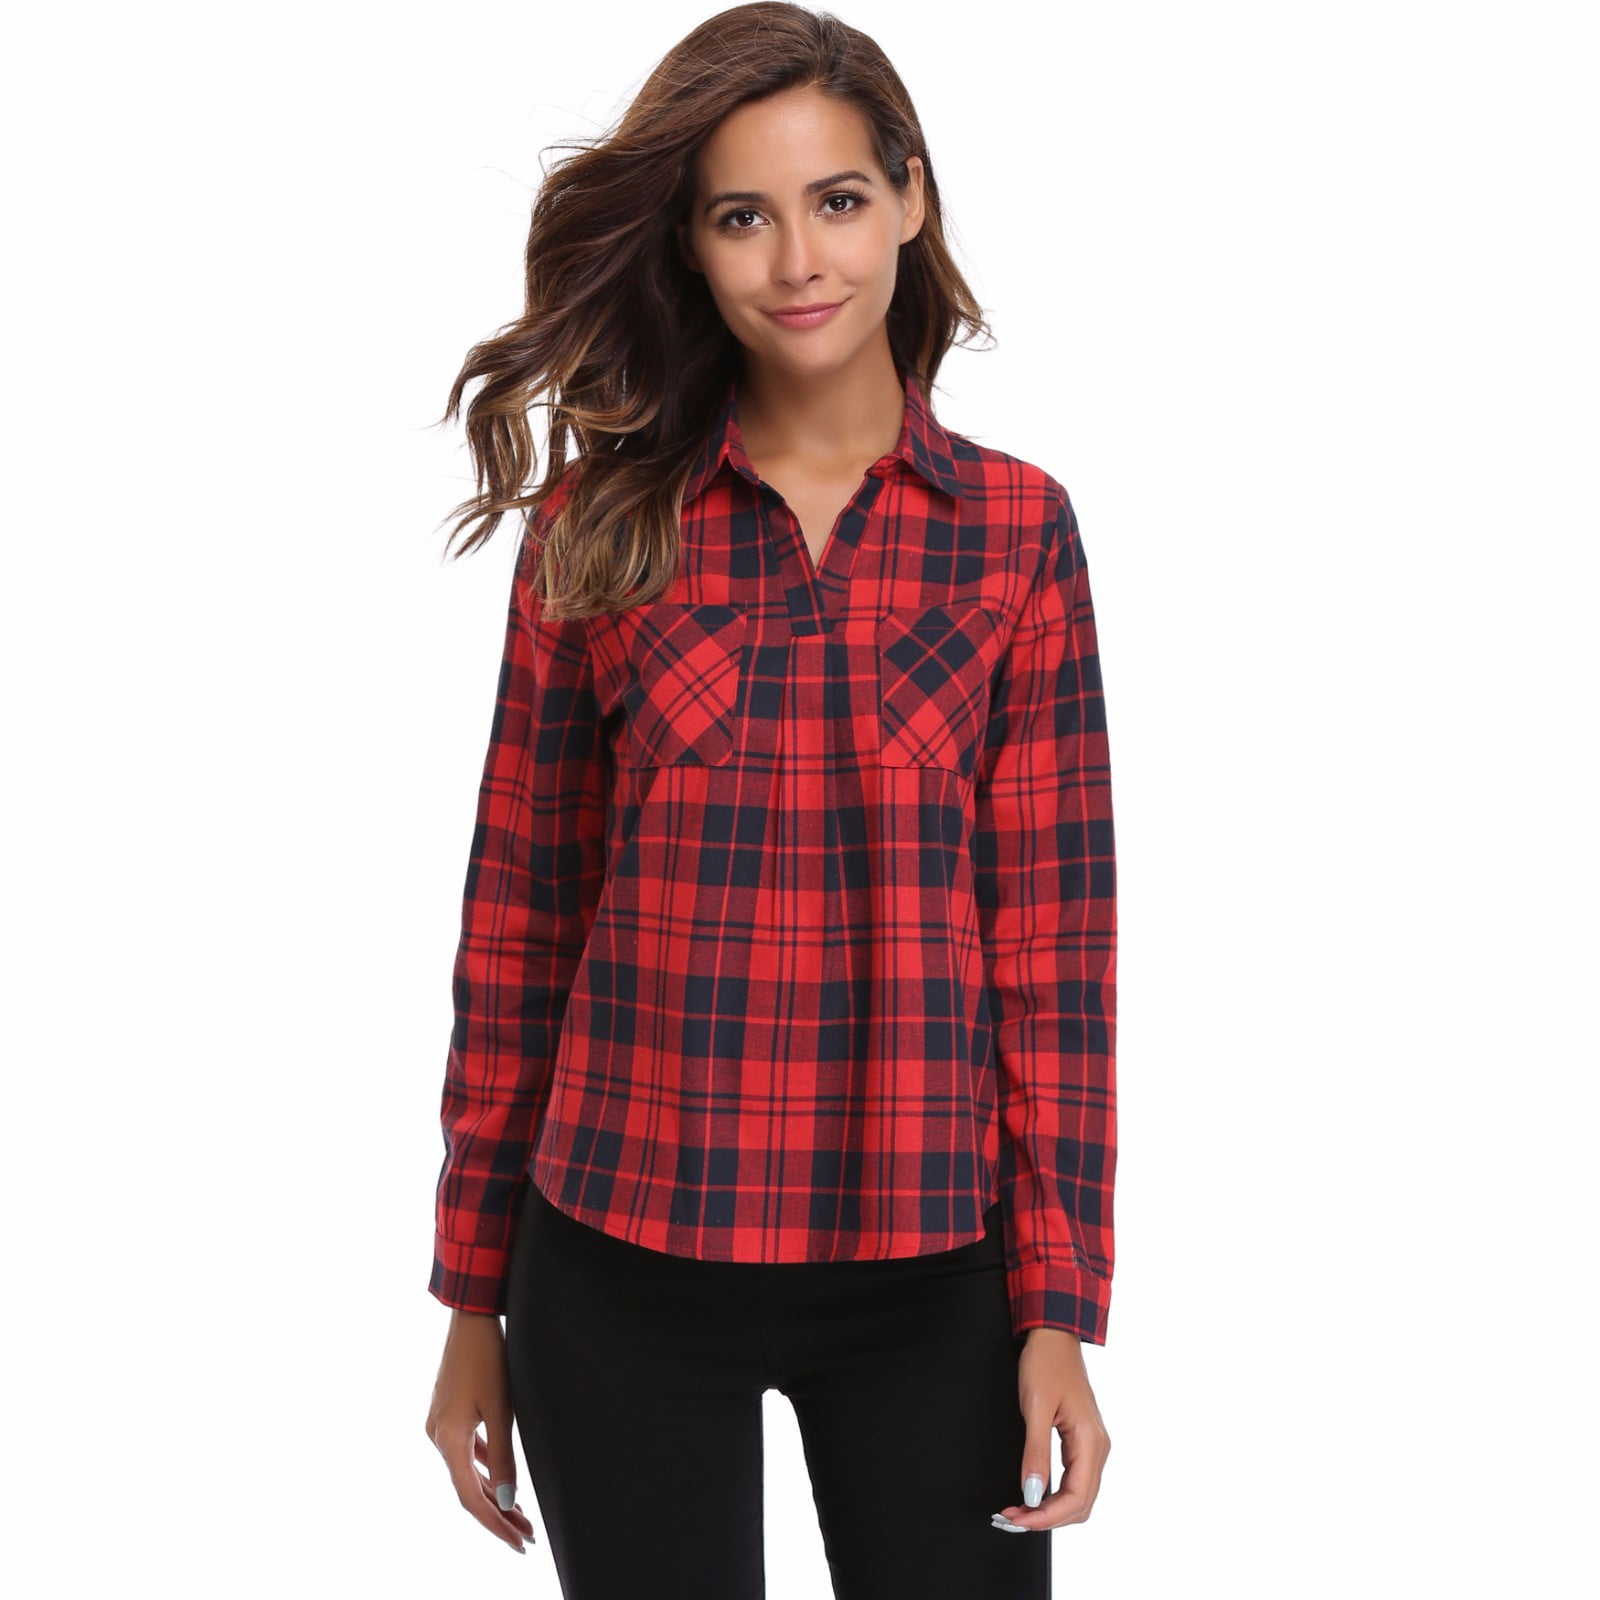 Miss Moly Womens Long Sleeve Plaid Shirt Point Collar V Neck Roll up ...